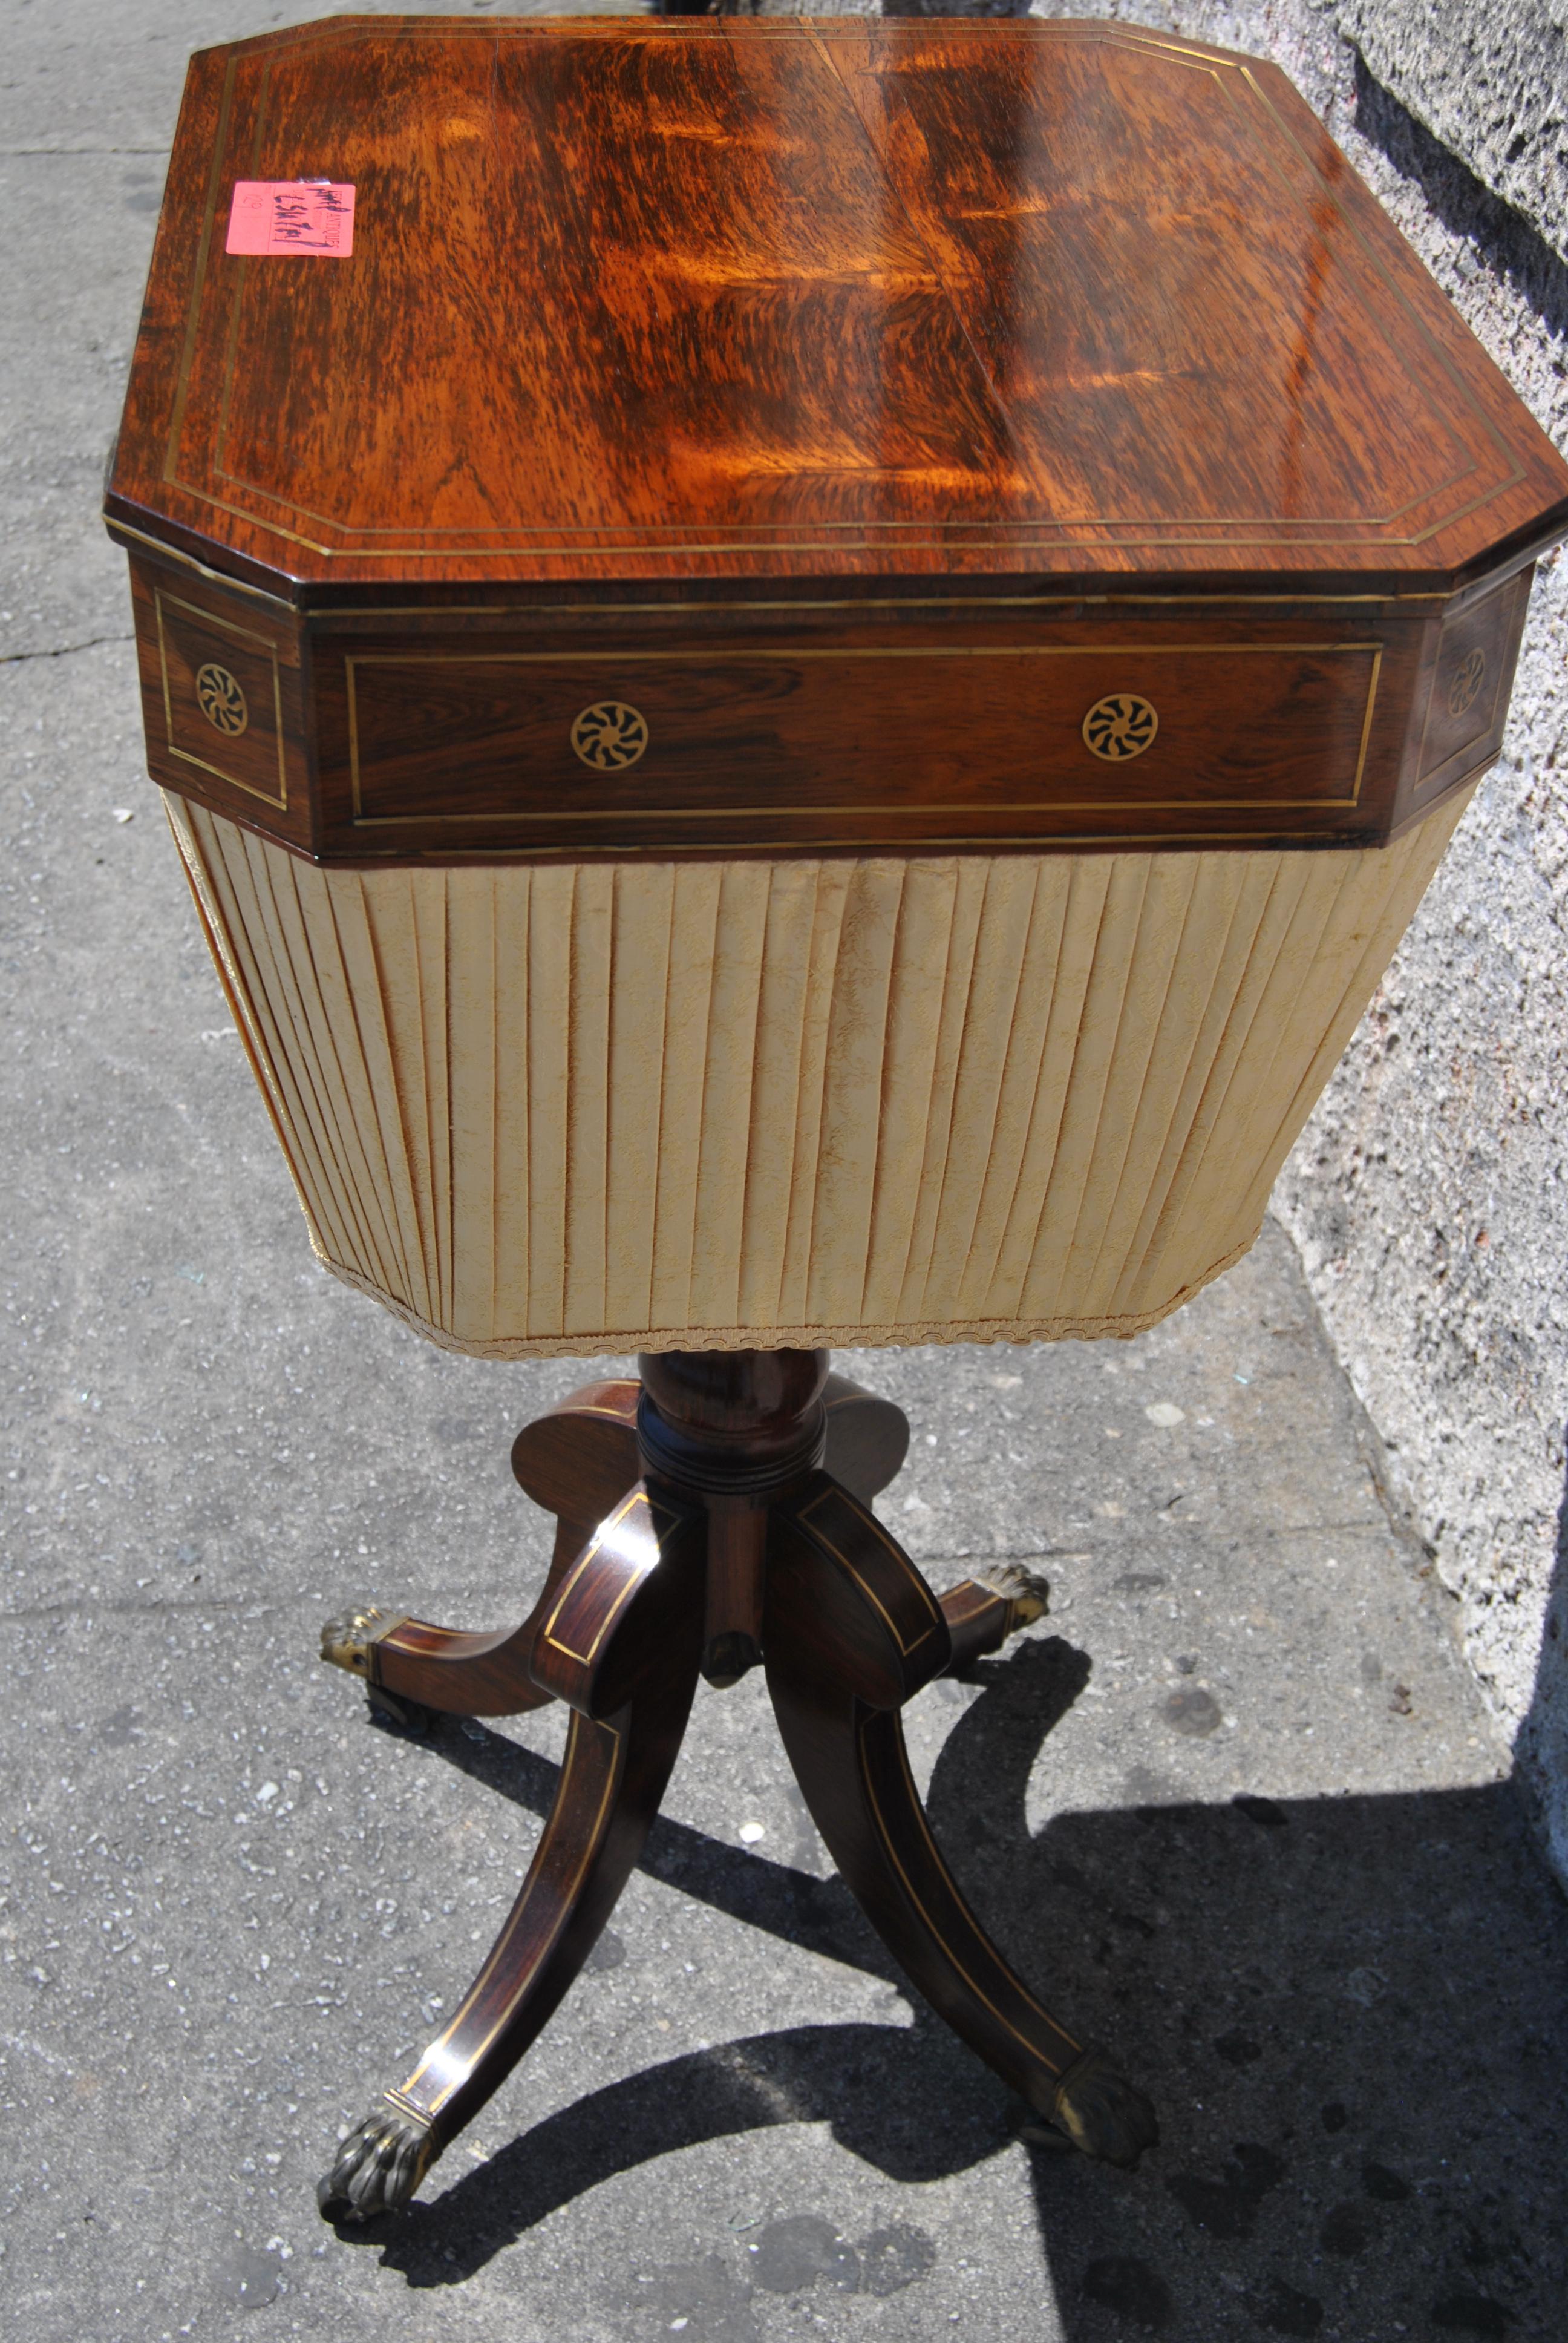 19th Century Regency / William IV English Rosewood Sewing / Work Table In Good Condition For Sale In Savannah, GA